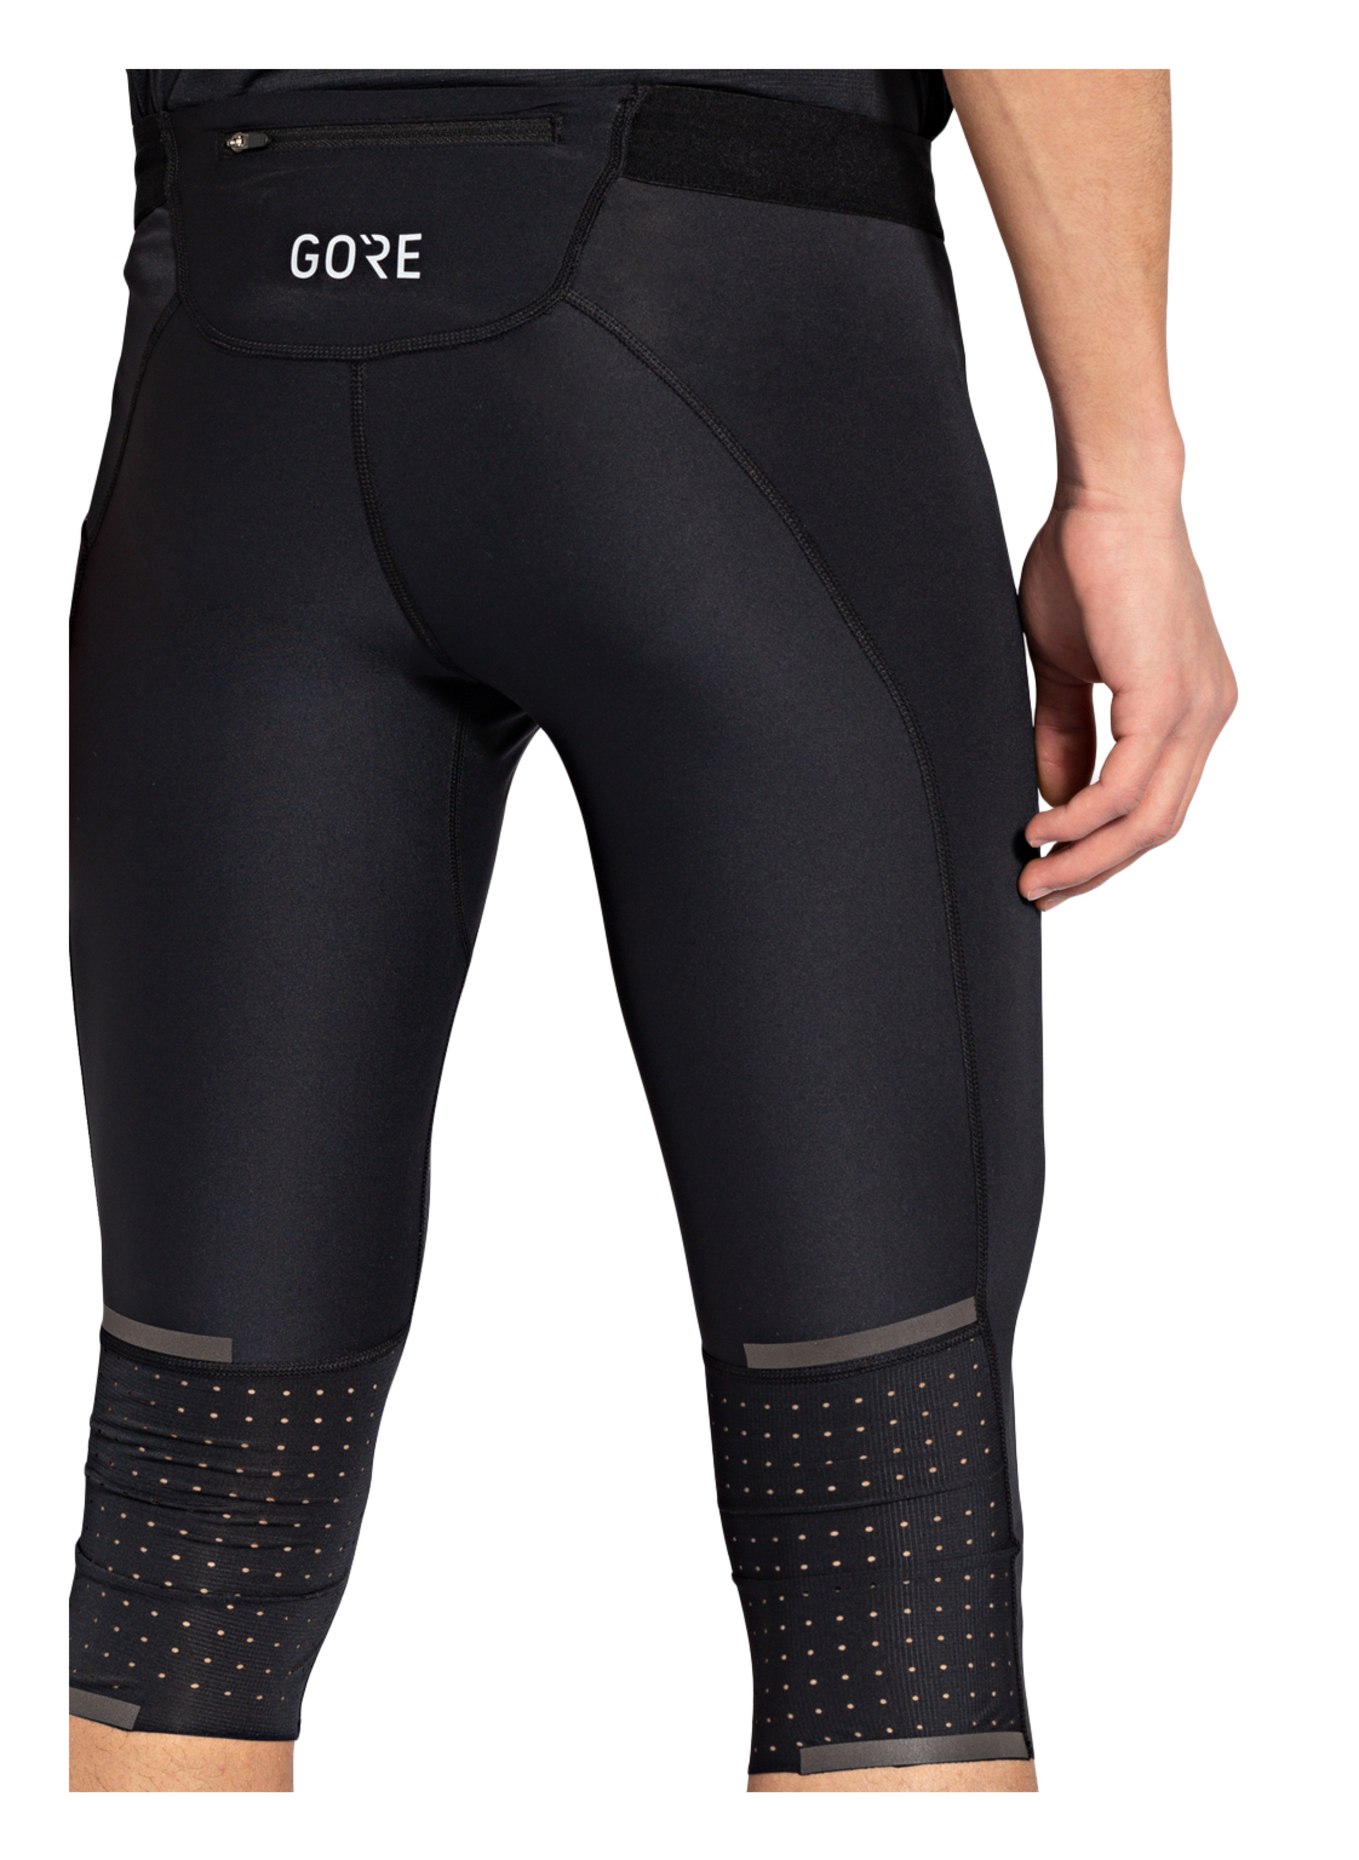 GORE RUNNING WEAR 3/4 tights IMPULSE with mesh inserts, Color: BLACK (Image 5)